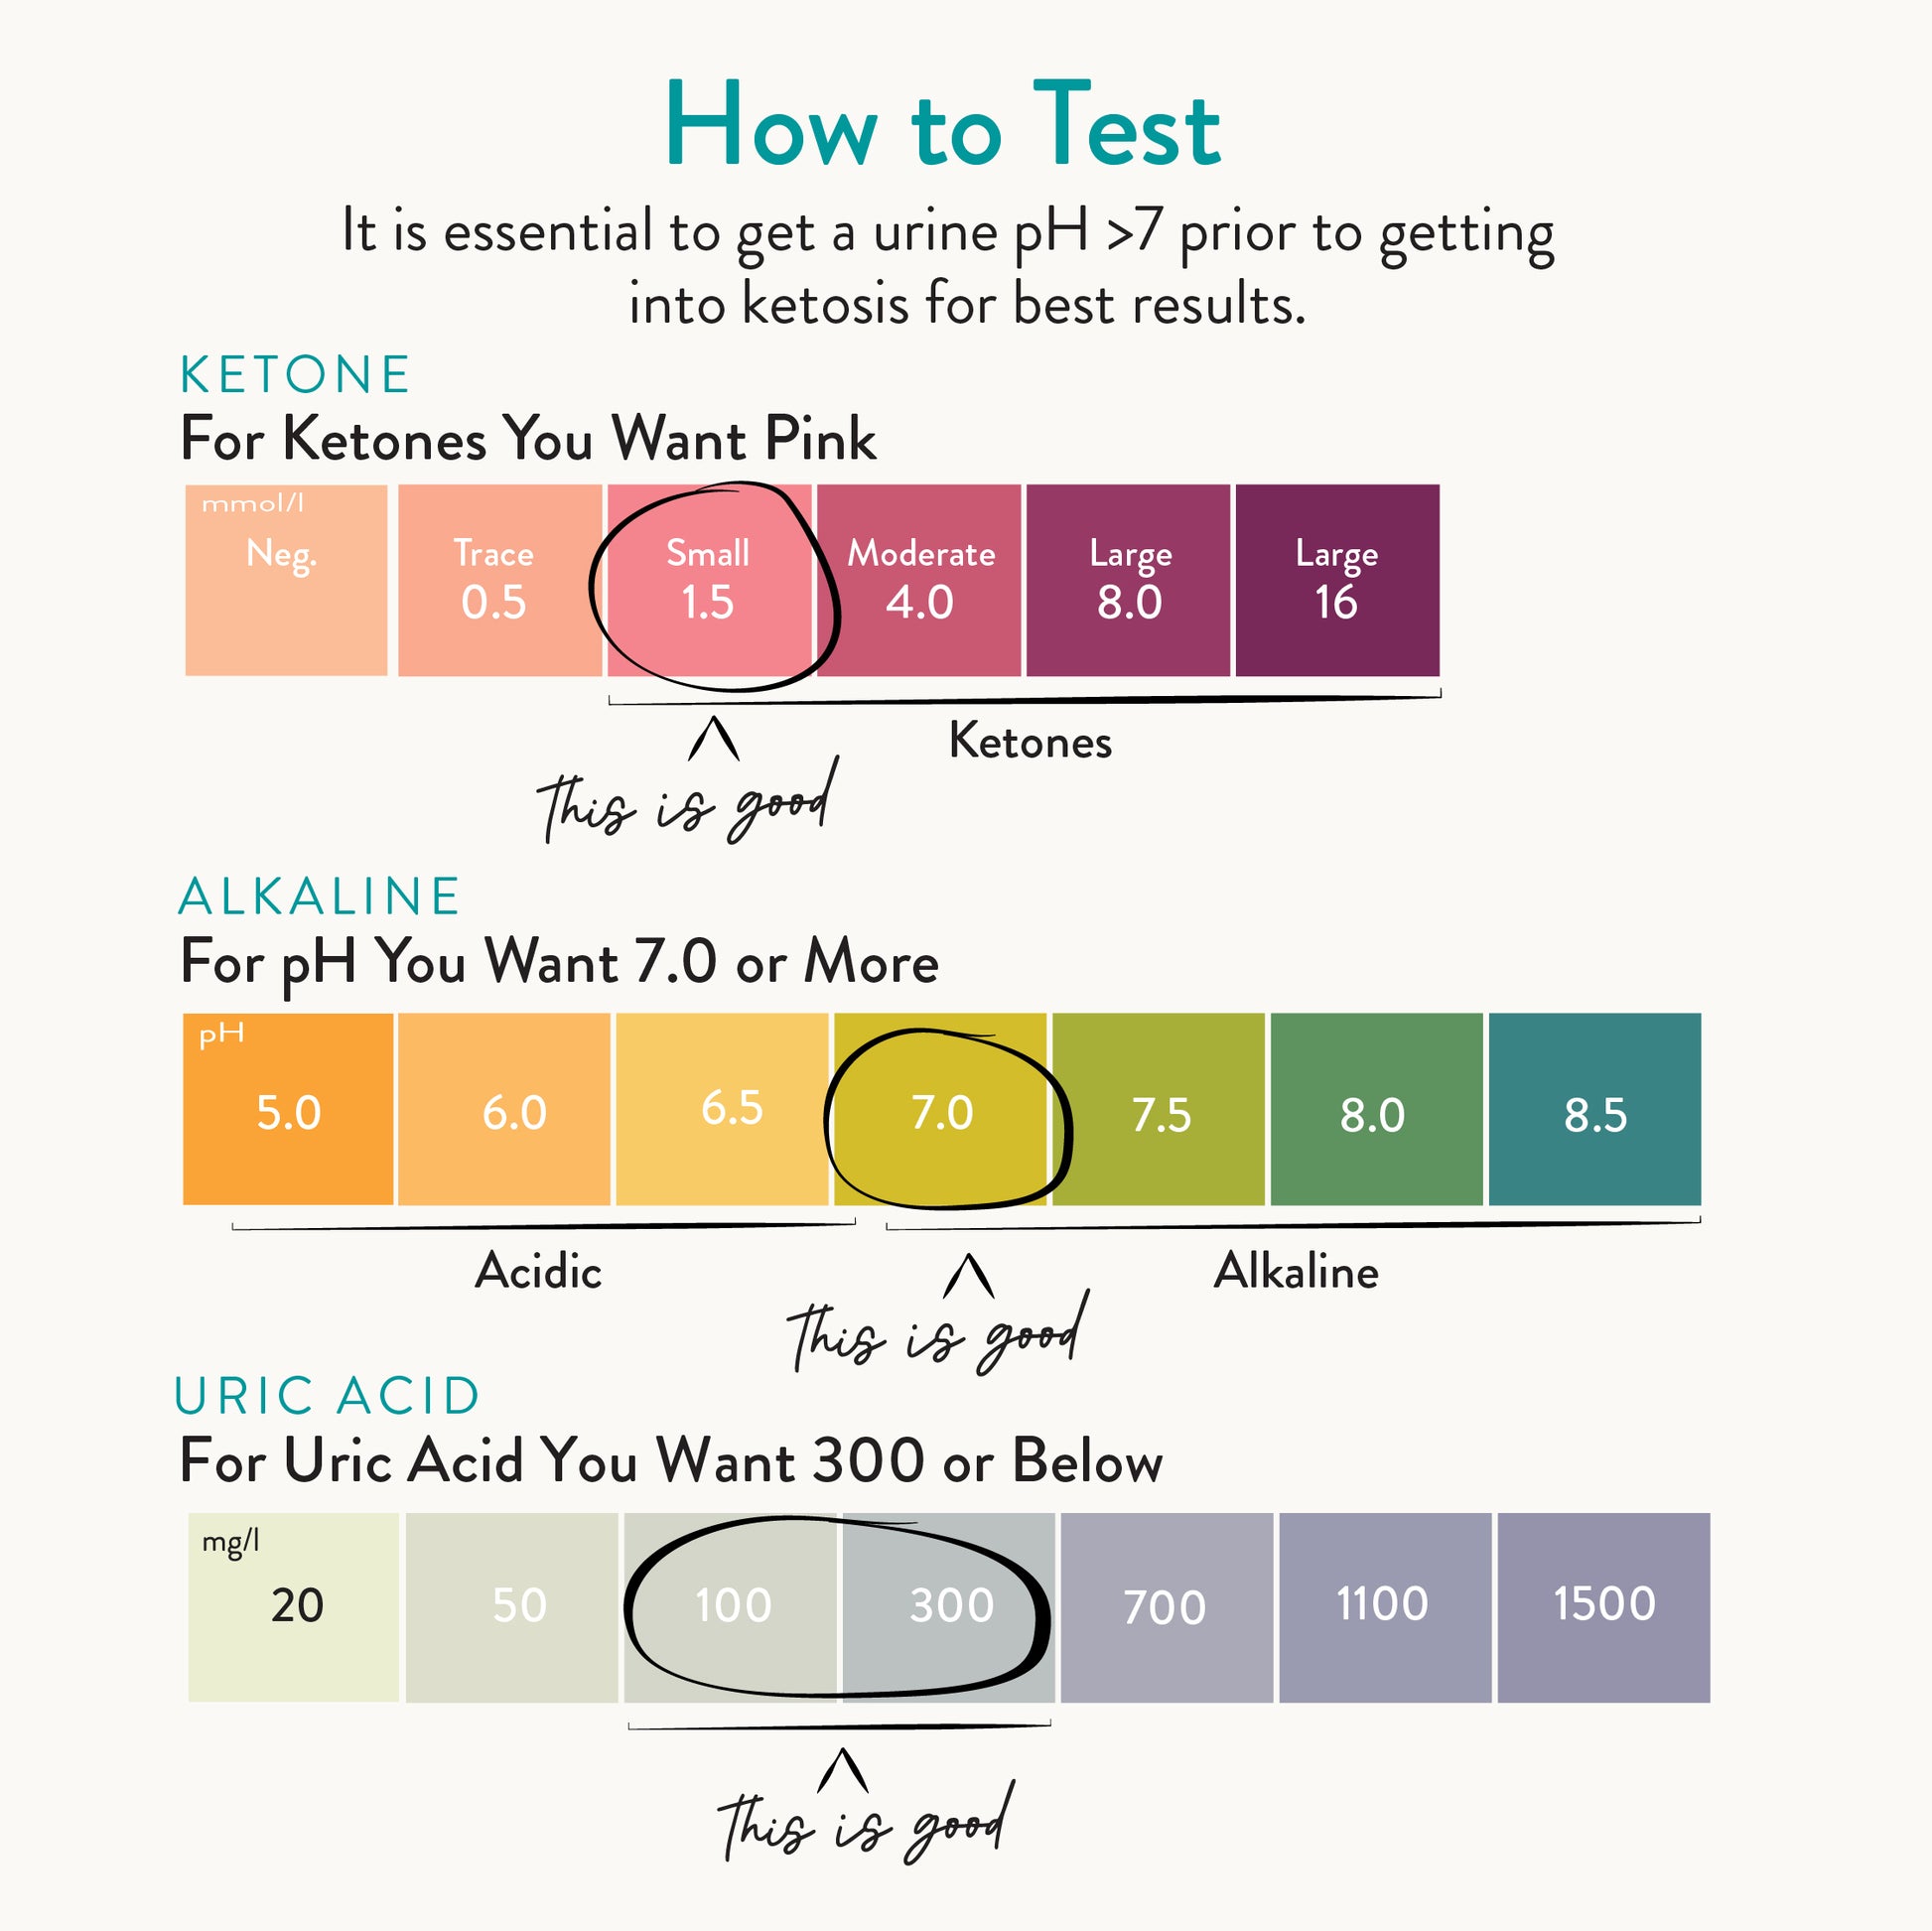 How to test. It is essential to get a urine pH greater than 7 prior to getting into ketosis for best results. For ketones you want pink. For uric acid you want 300 or below.